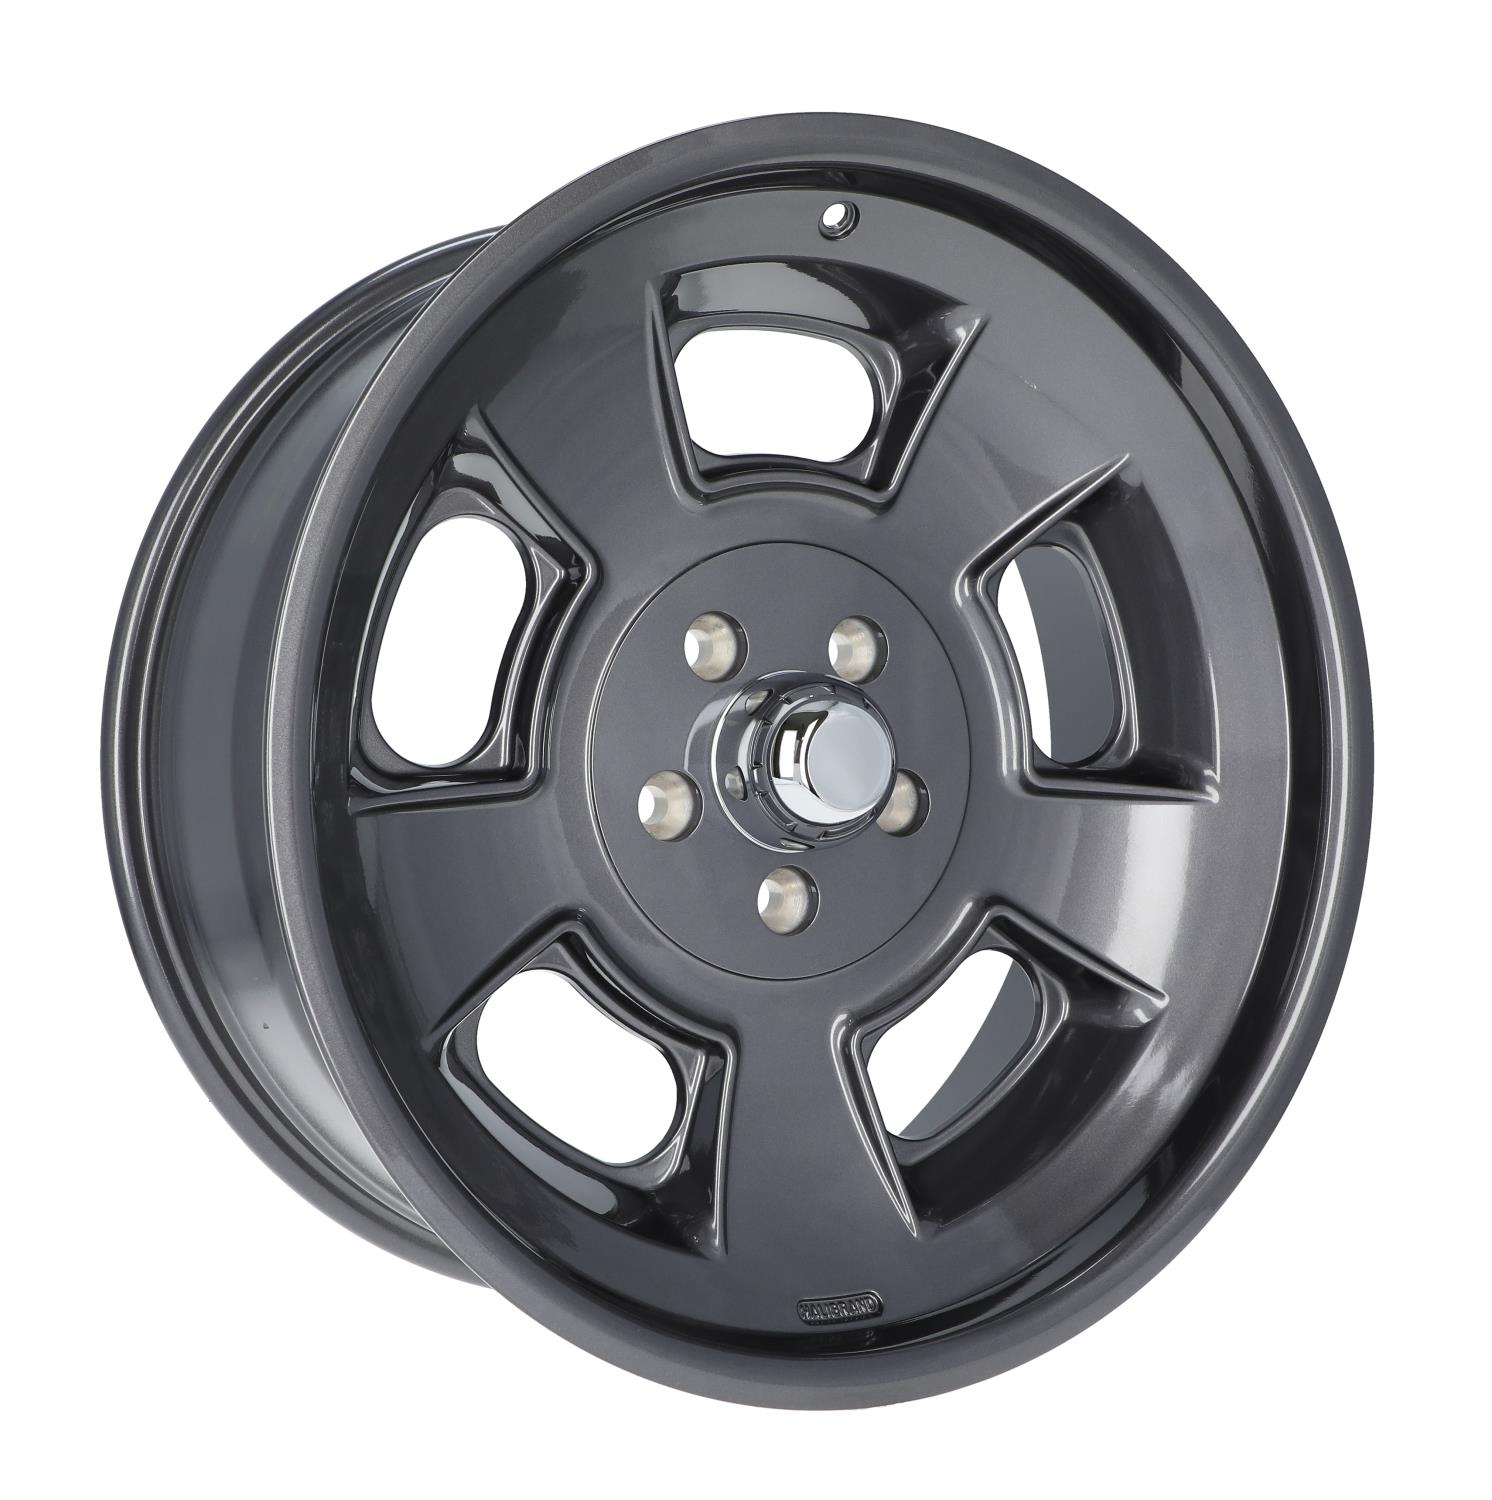 Sprint Front Wheel, Size: 20x8.5", Bolt Pattern: 5x5", Backspace: 4.75" [Anthracite - Gloss Clearcoat]